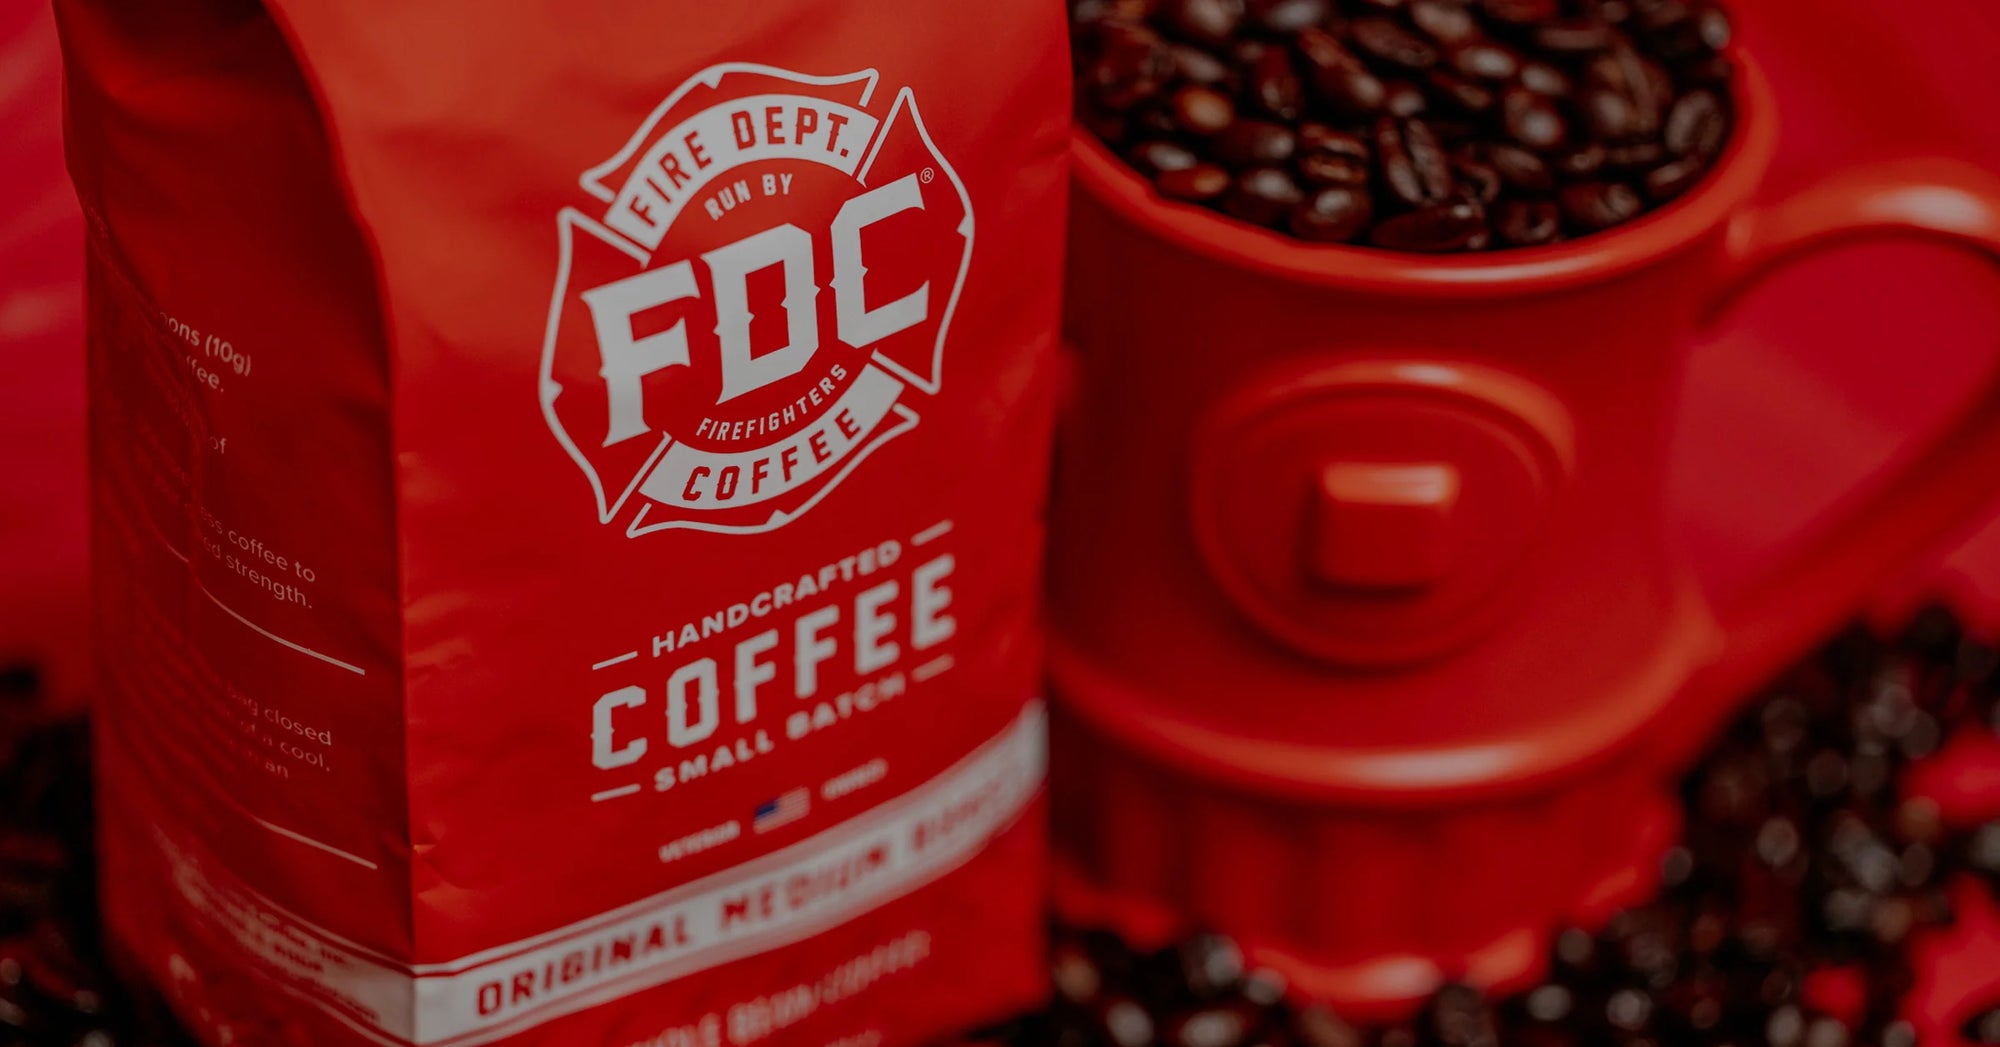 Fire Department Coffee Original Roast Coffee in a bag and inside of a fire hydrant mug.